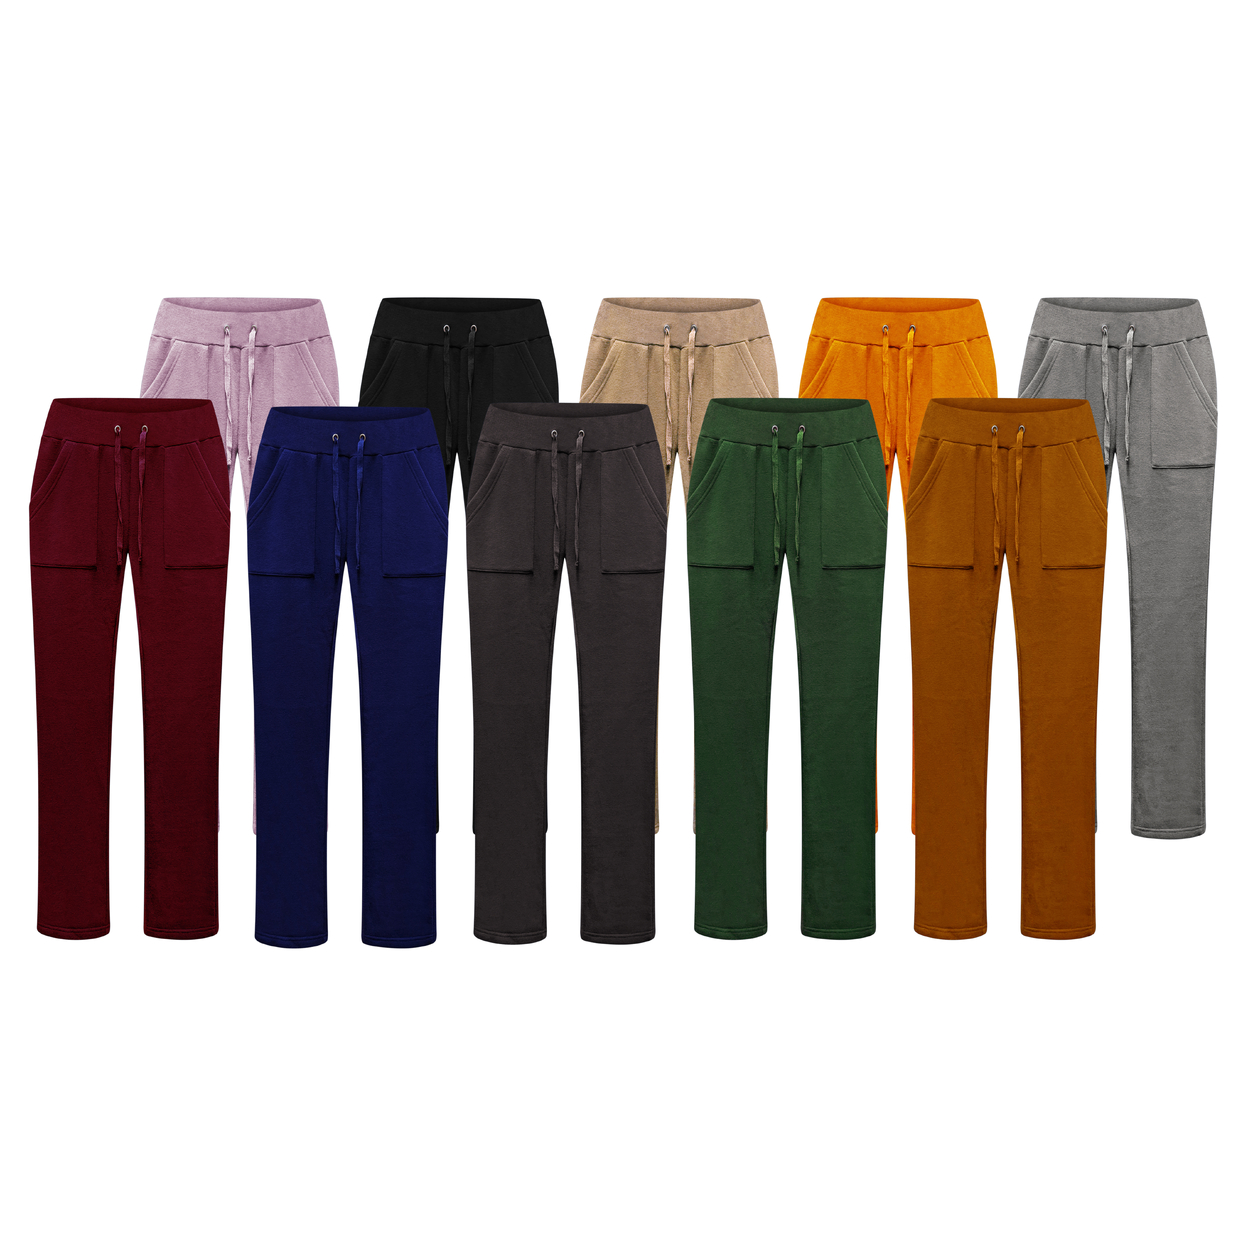 Women's Ultra Soft Cozy Fleece Lined Elastic Waistband Terry Knit Pants - Assorted, Xx-large